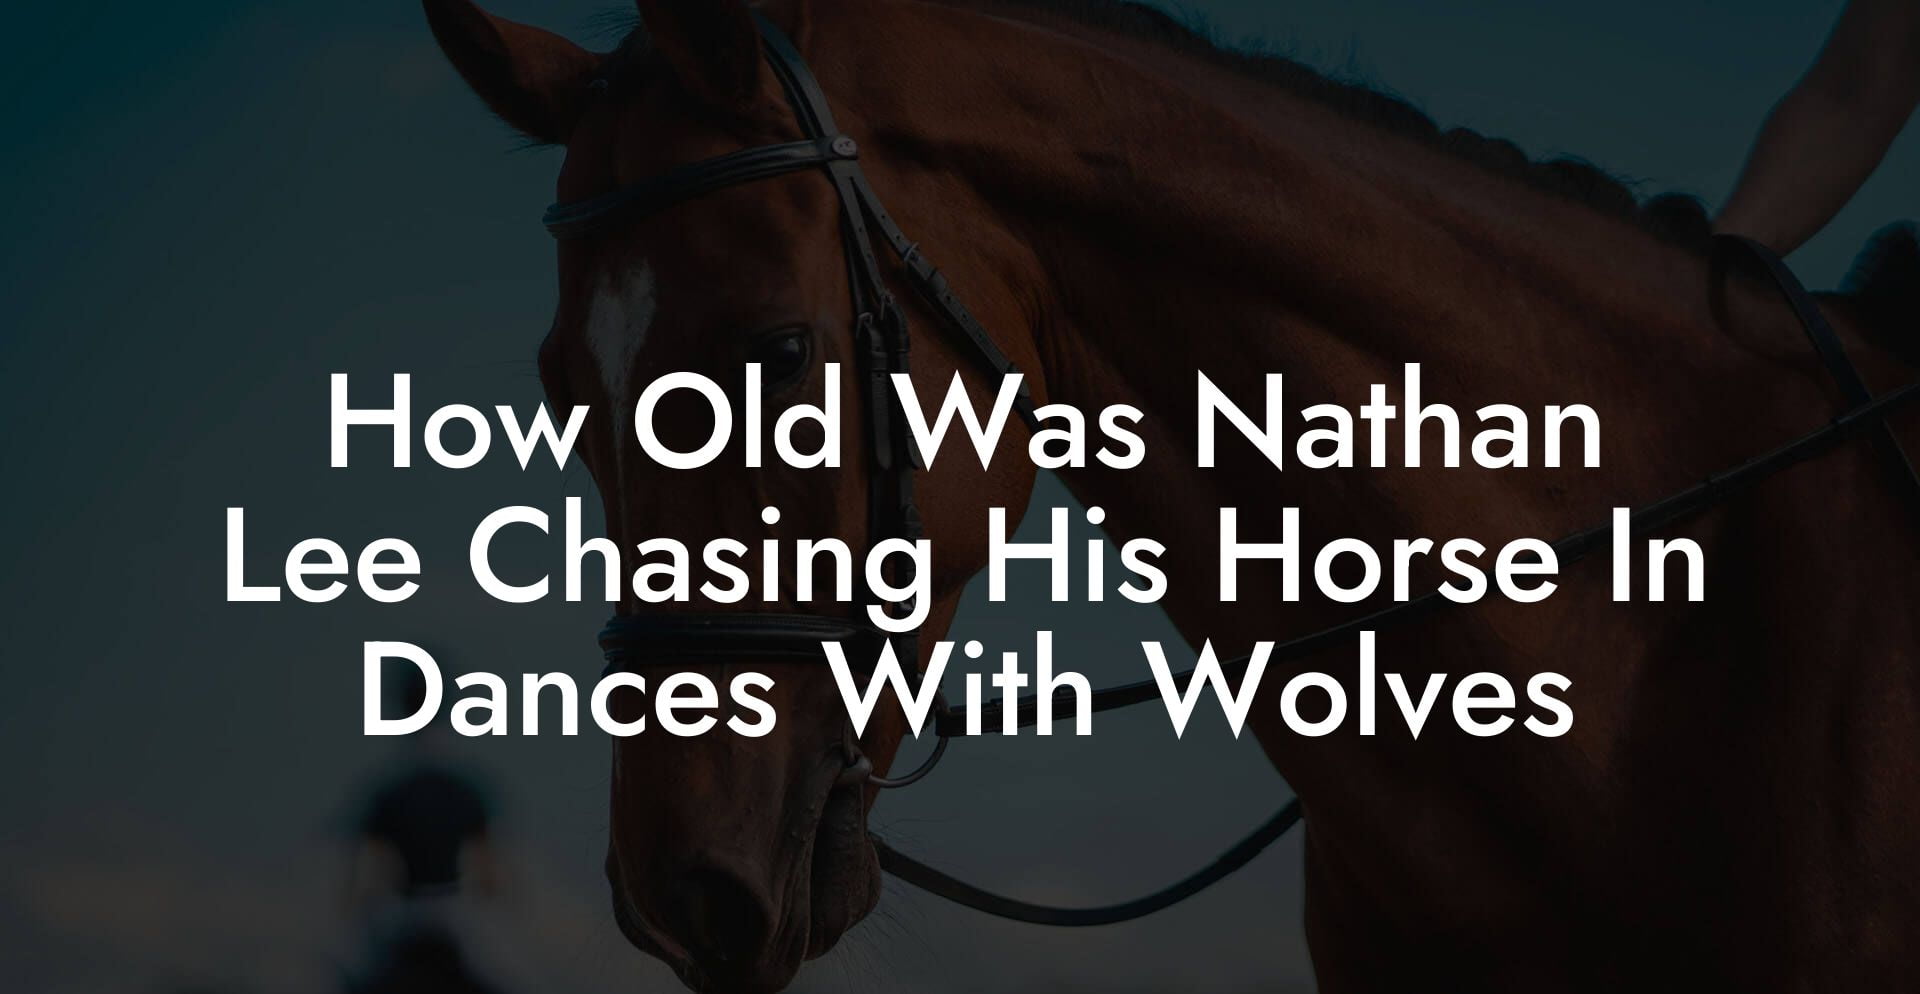 How Old Was Nathan Lee Chasing His Horse In Dances With Wolves